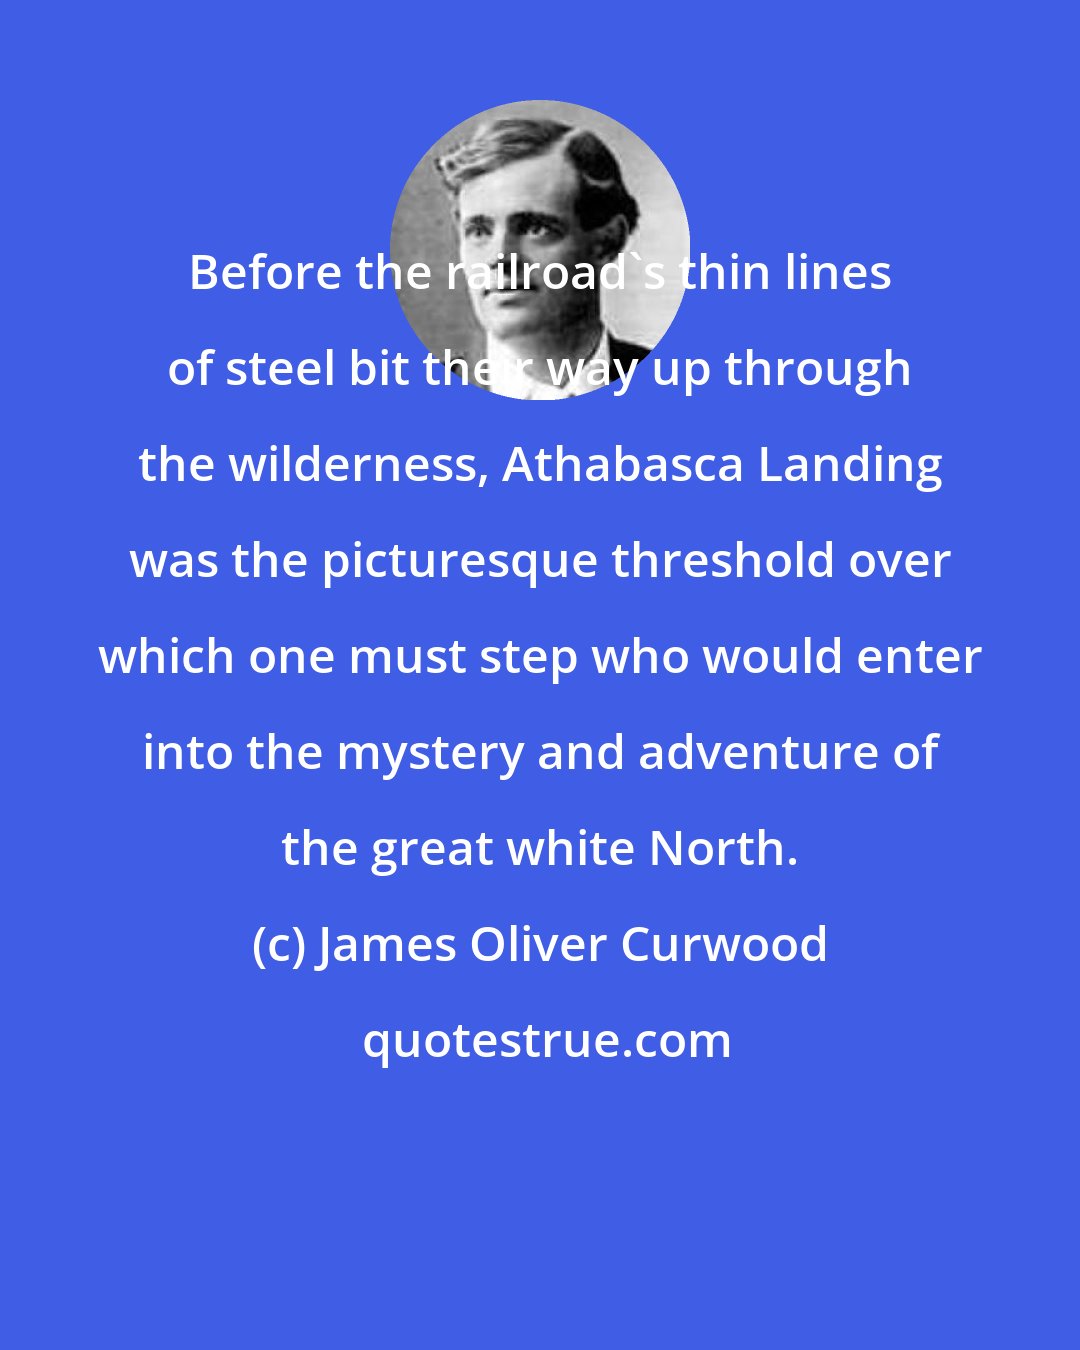 James Oliver Curwood: Before the railroad's thin lines of steel bit their way up through the wilderness, Athabasca Landing was the picturesque threshold over which one must step who would enter into the mystery and adventure of the great white North.